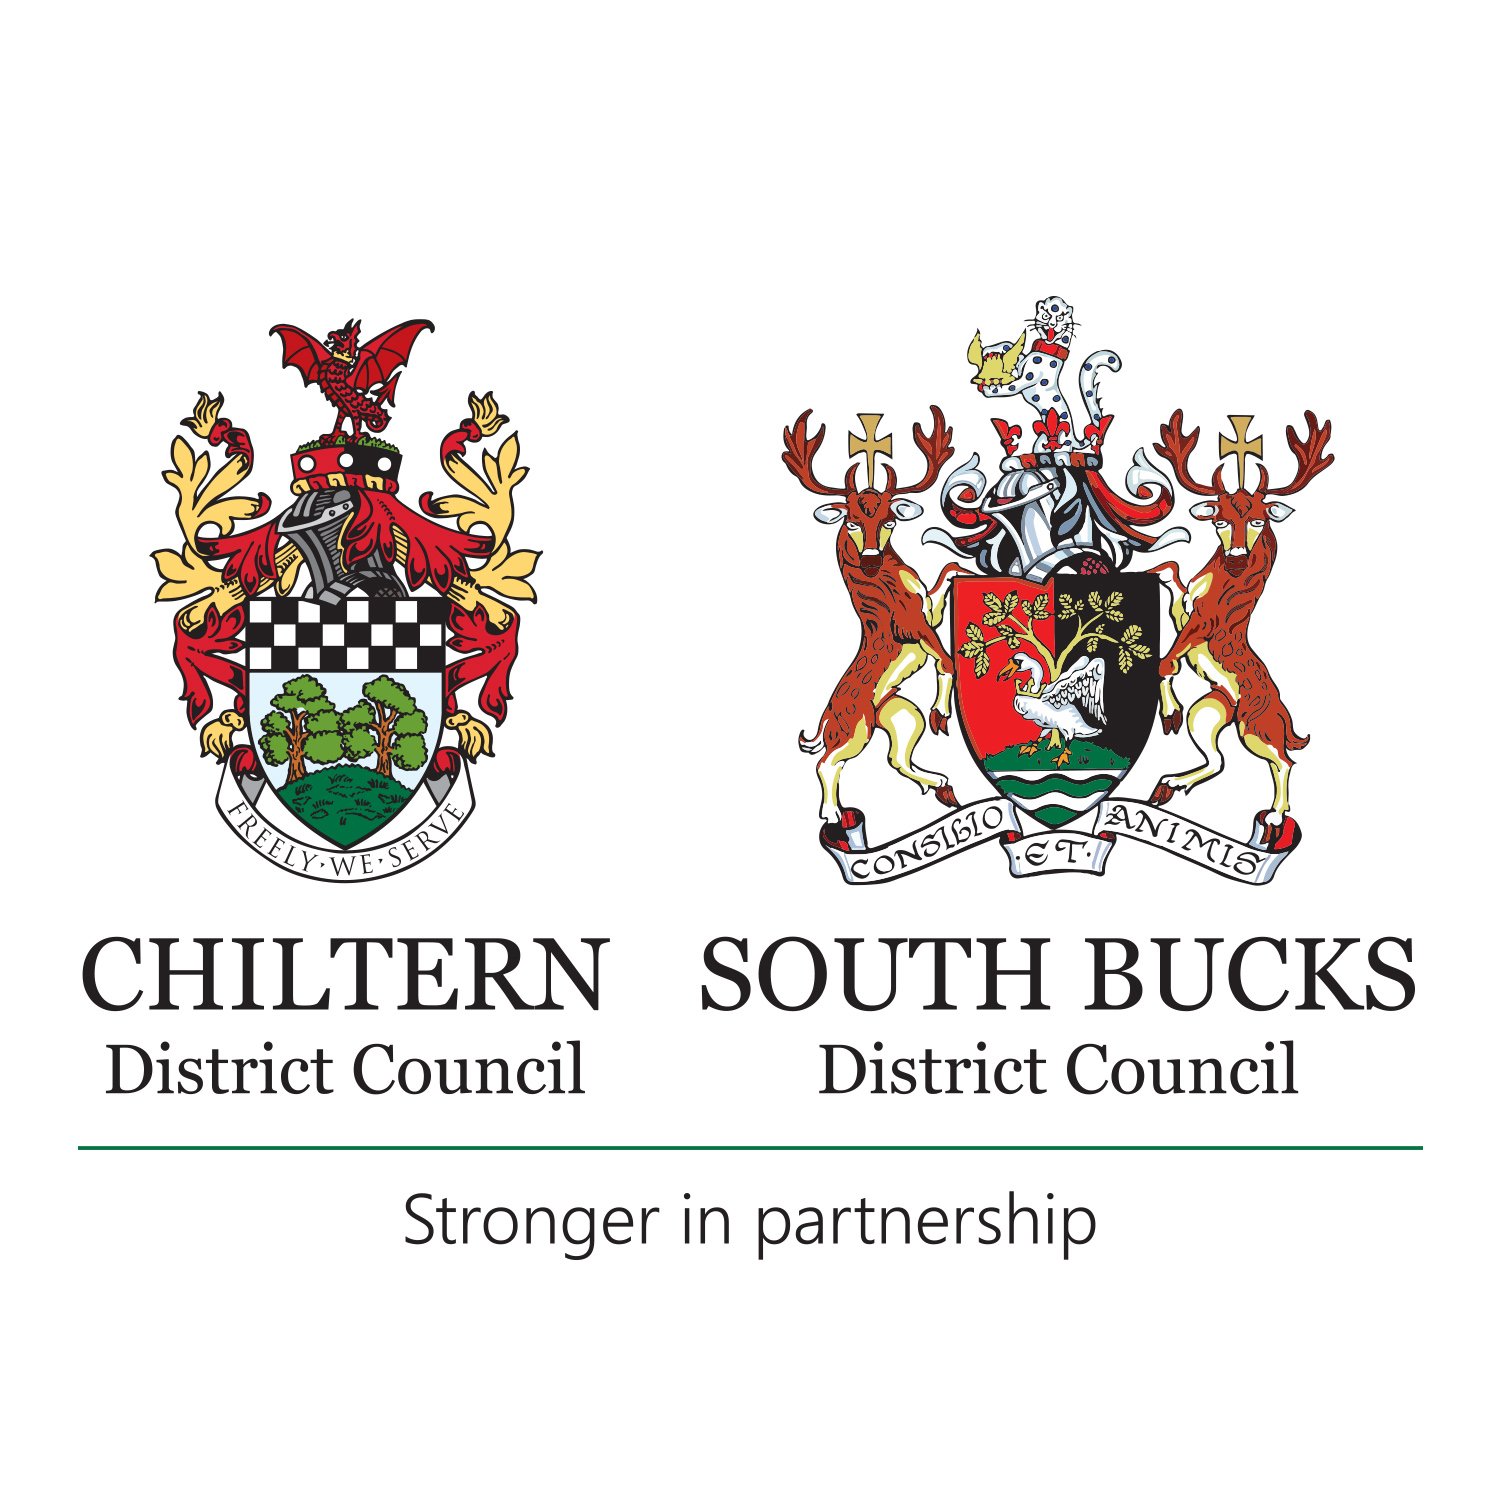 Updates from the Community and Leisure team at Chiltern and South Bucks District Councils.

Please note this account is not monitored 24/7.